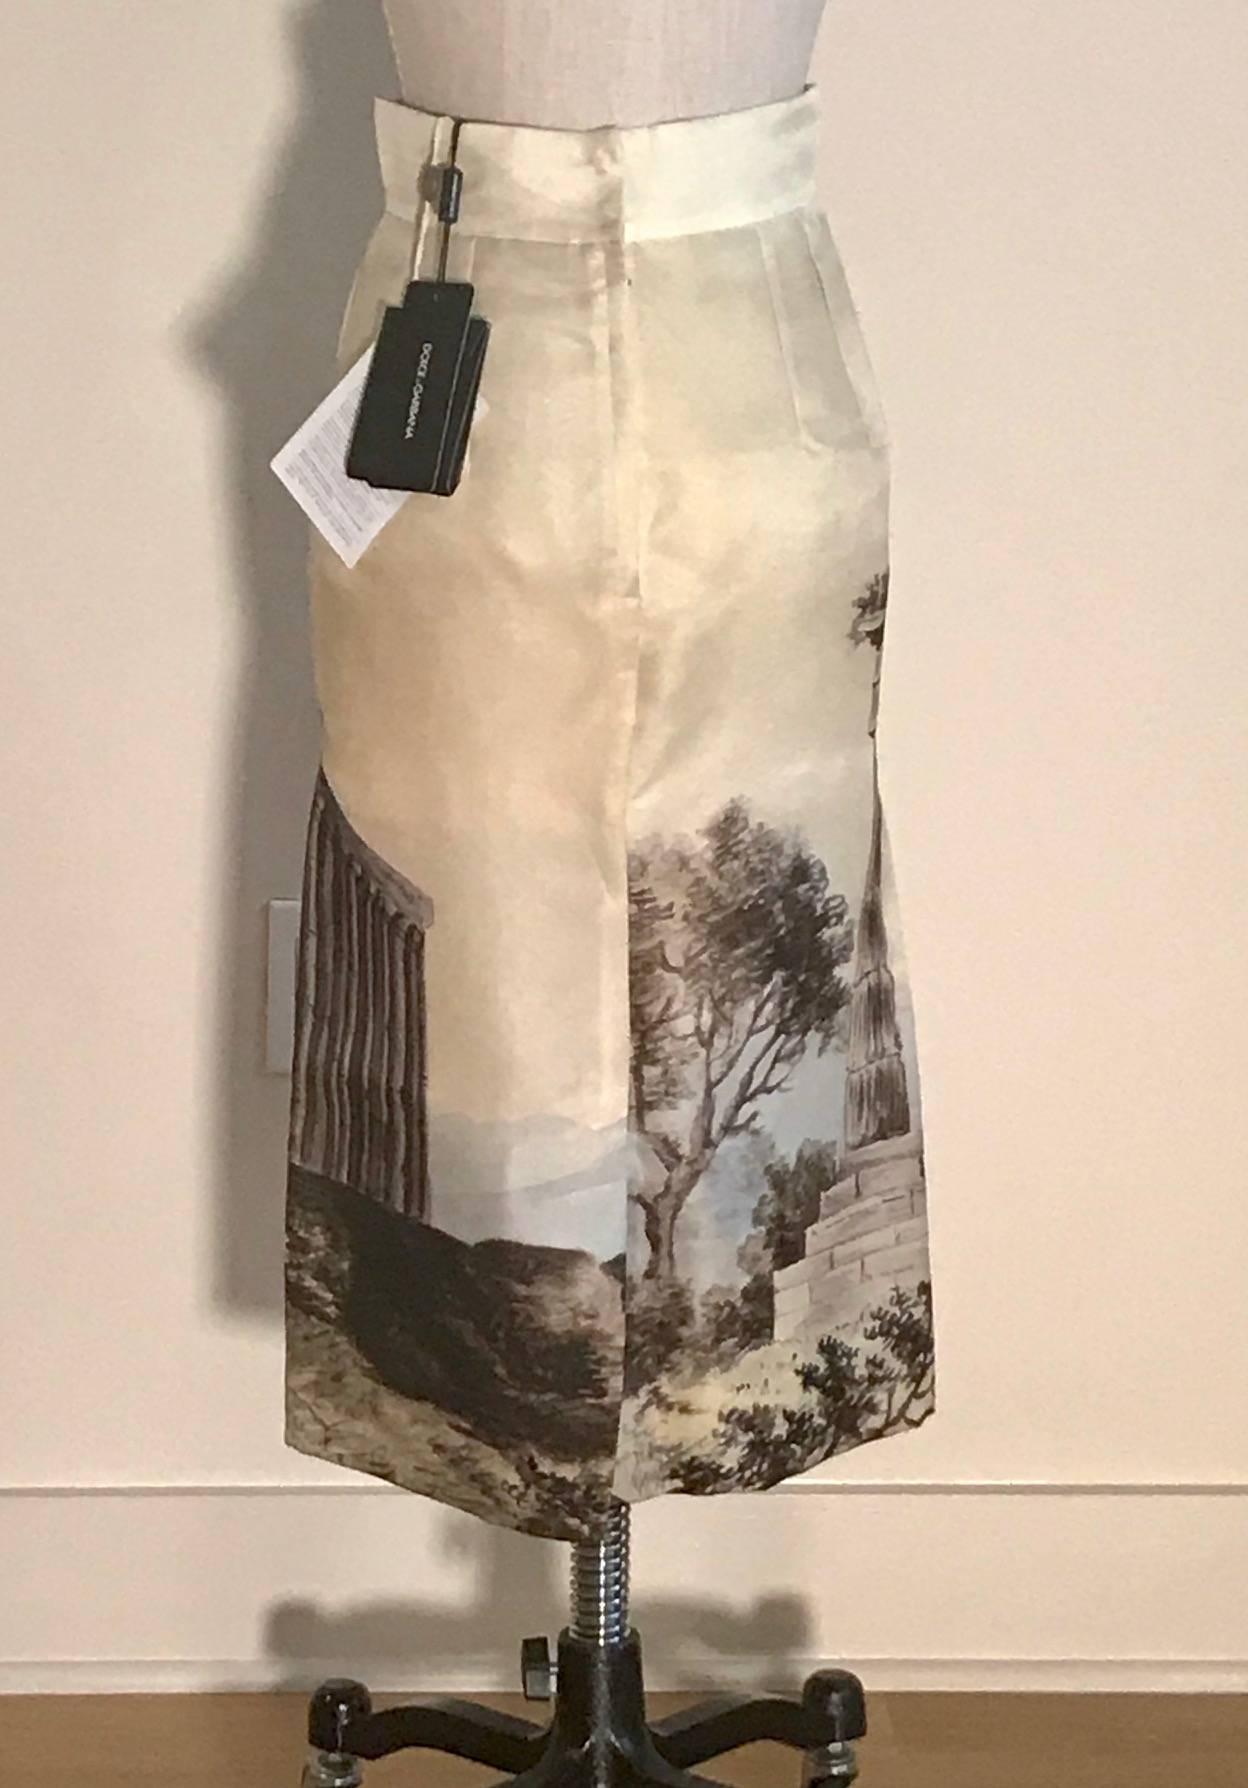 Dolce & Gabbana cream silk pencil skirt featuring a watercolor like temple print. From the Spring/Summer 2014 collection. Back zip and snaps, slit at center back.

100% silk, fully lined. 

Made in Italy.

Size IT 38, approximate US 2. See